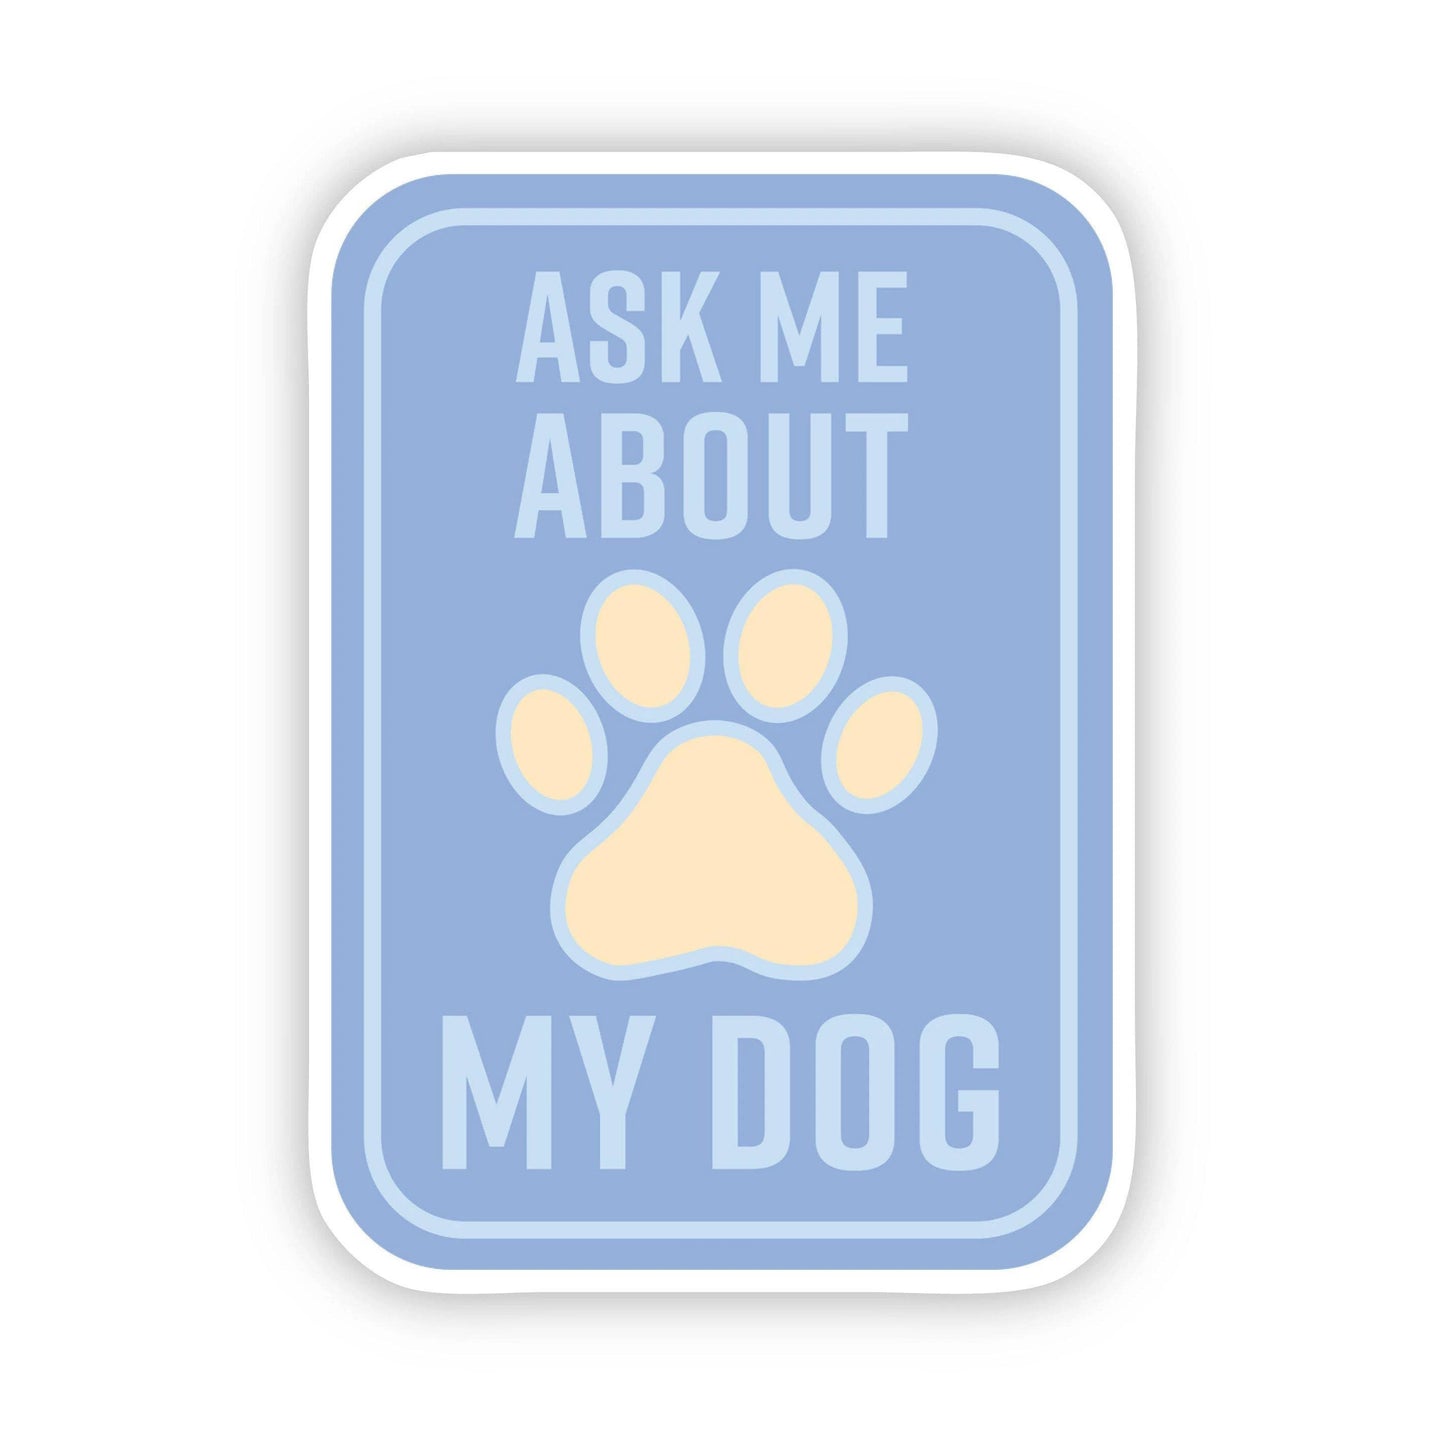 Ask me about my dog sticker blue, by Big Moods